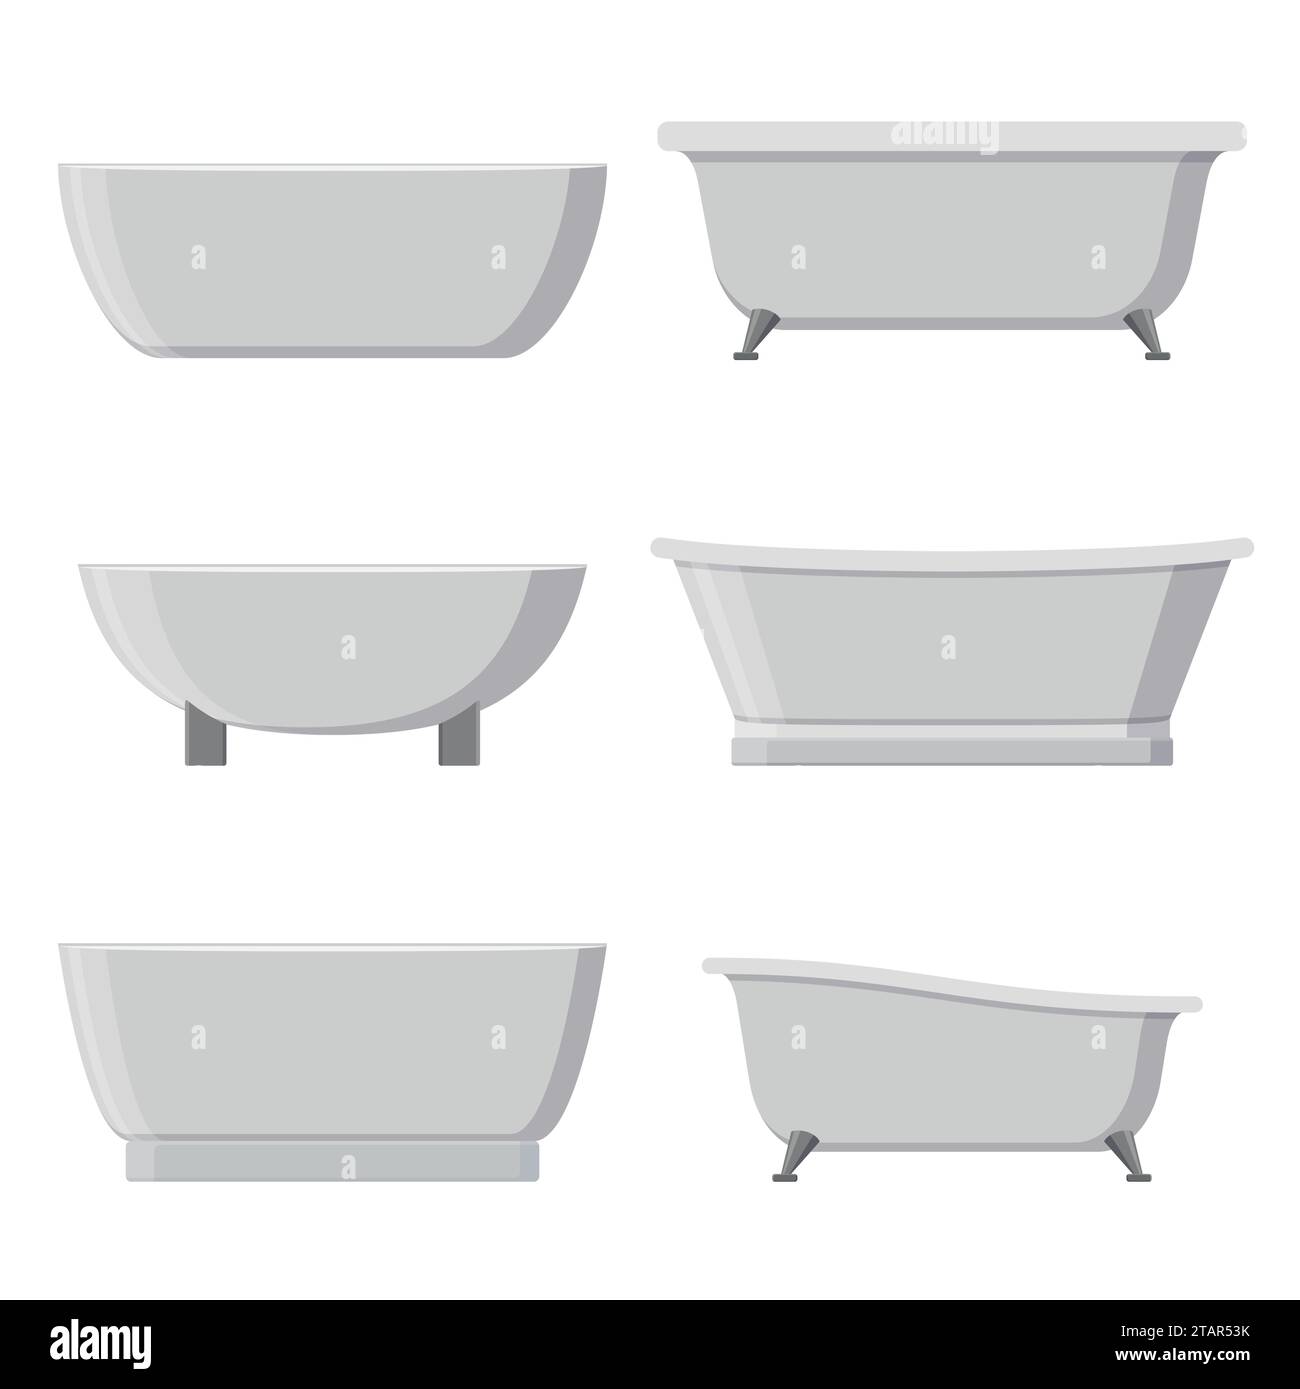 Bathtubs of different style and shape set isolated on white background vector illustration Stock Vector